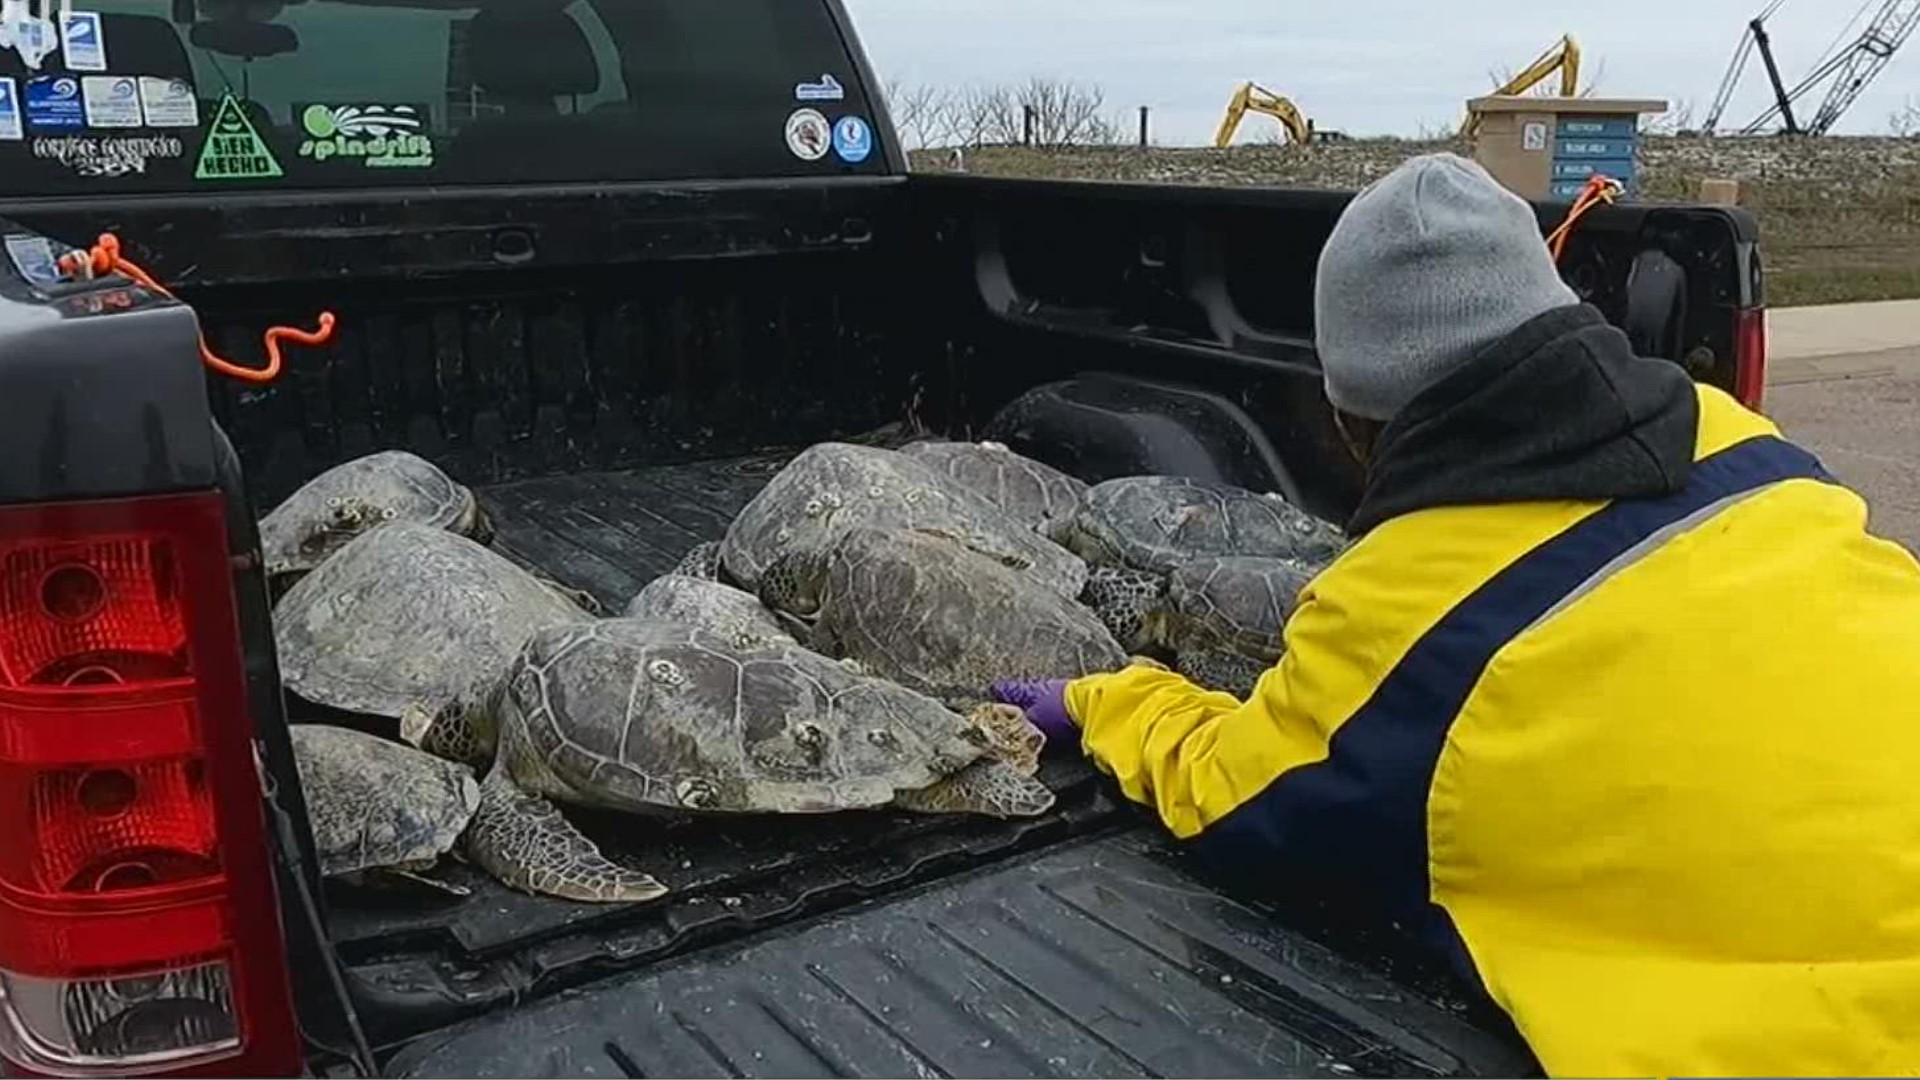 With another artic blast on its way, experts are preparing for another round of cold stunned sea turtles.